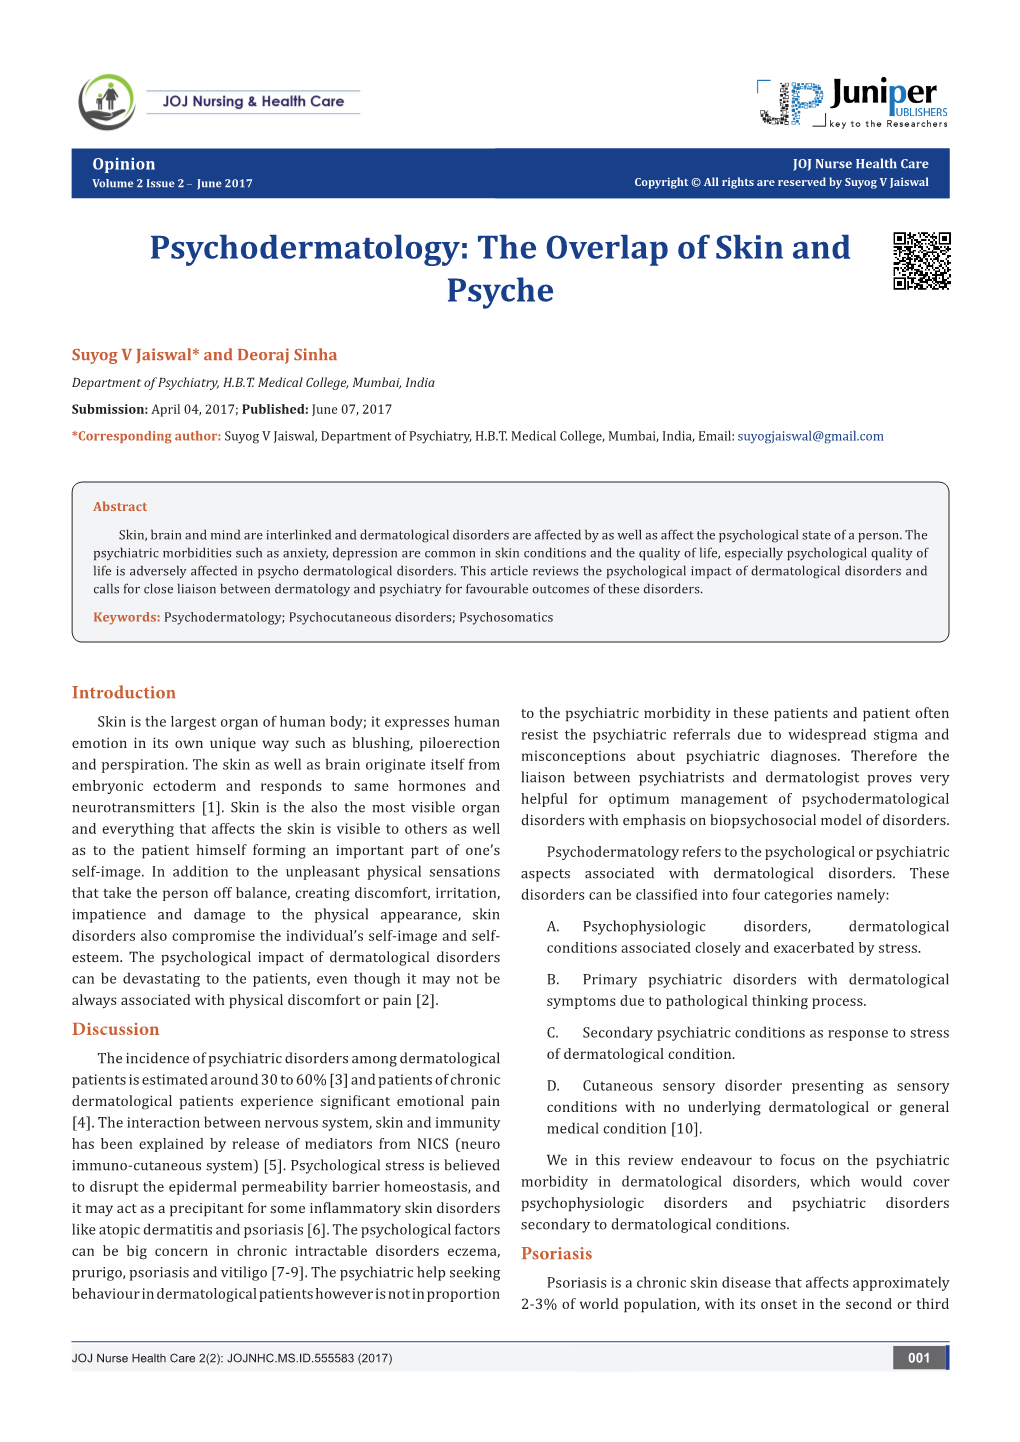 Psychodermatology: the Overlap of Skin and Psyche